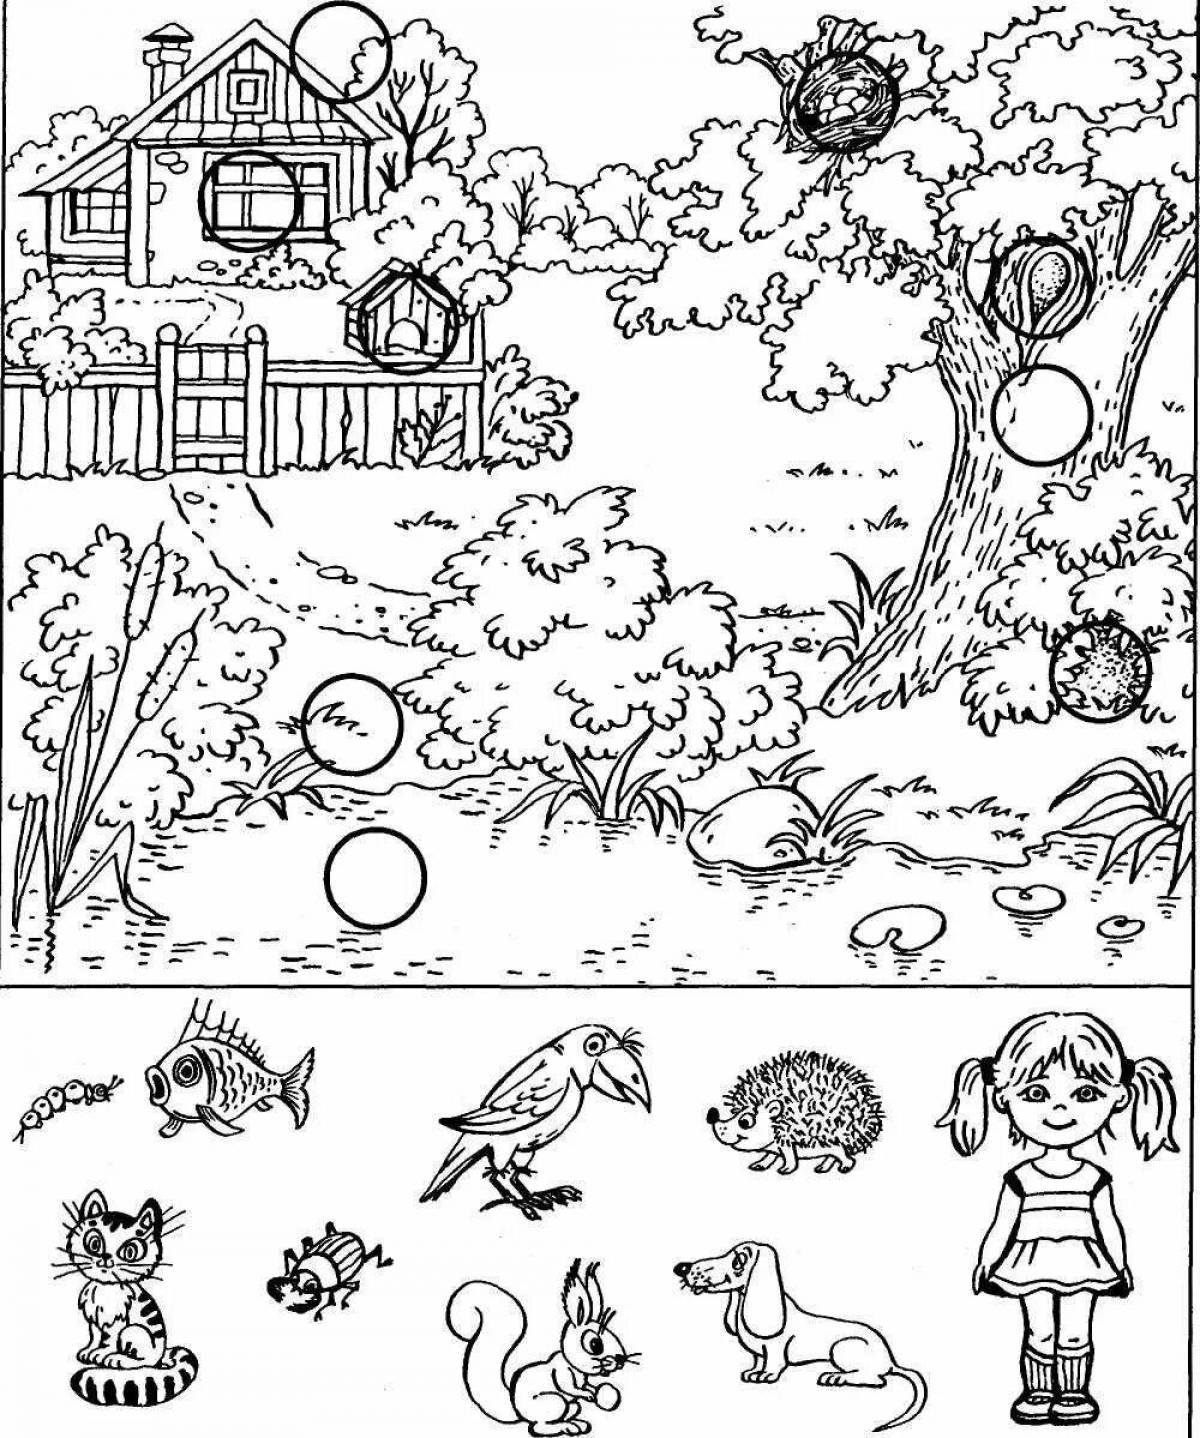 Coloring book who lives where for children